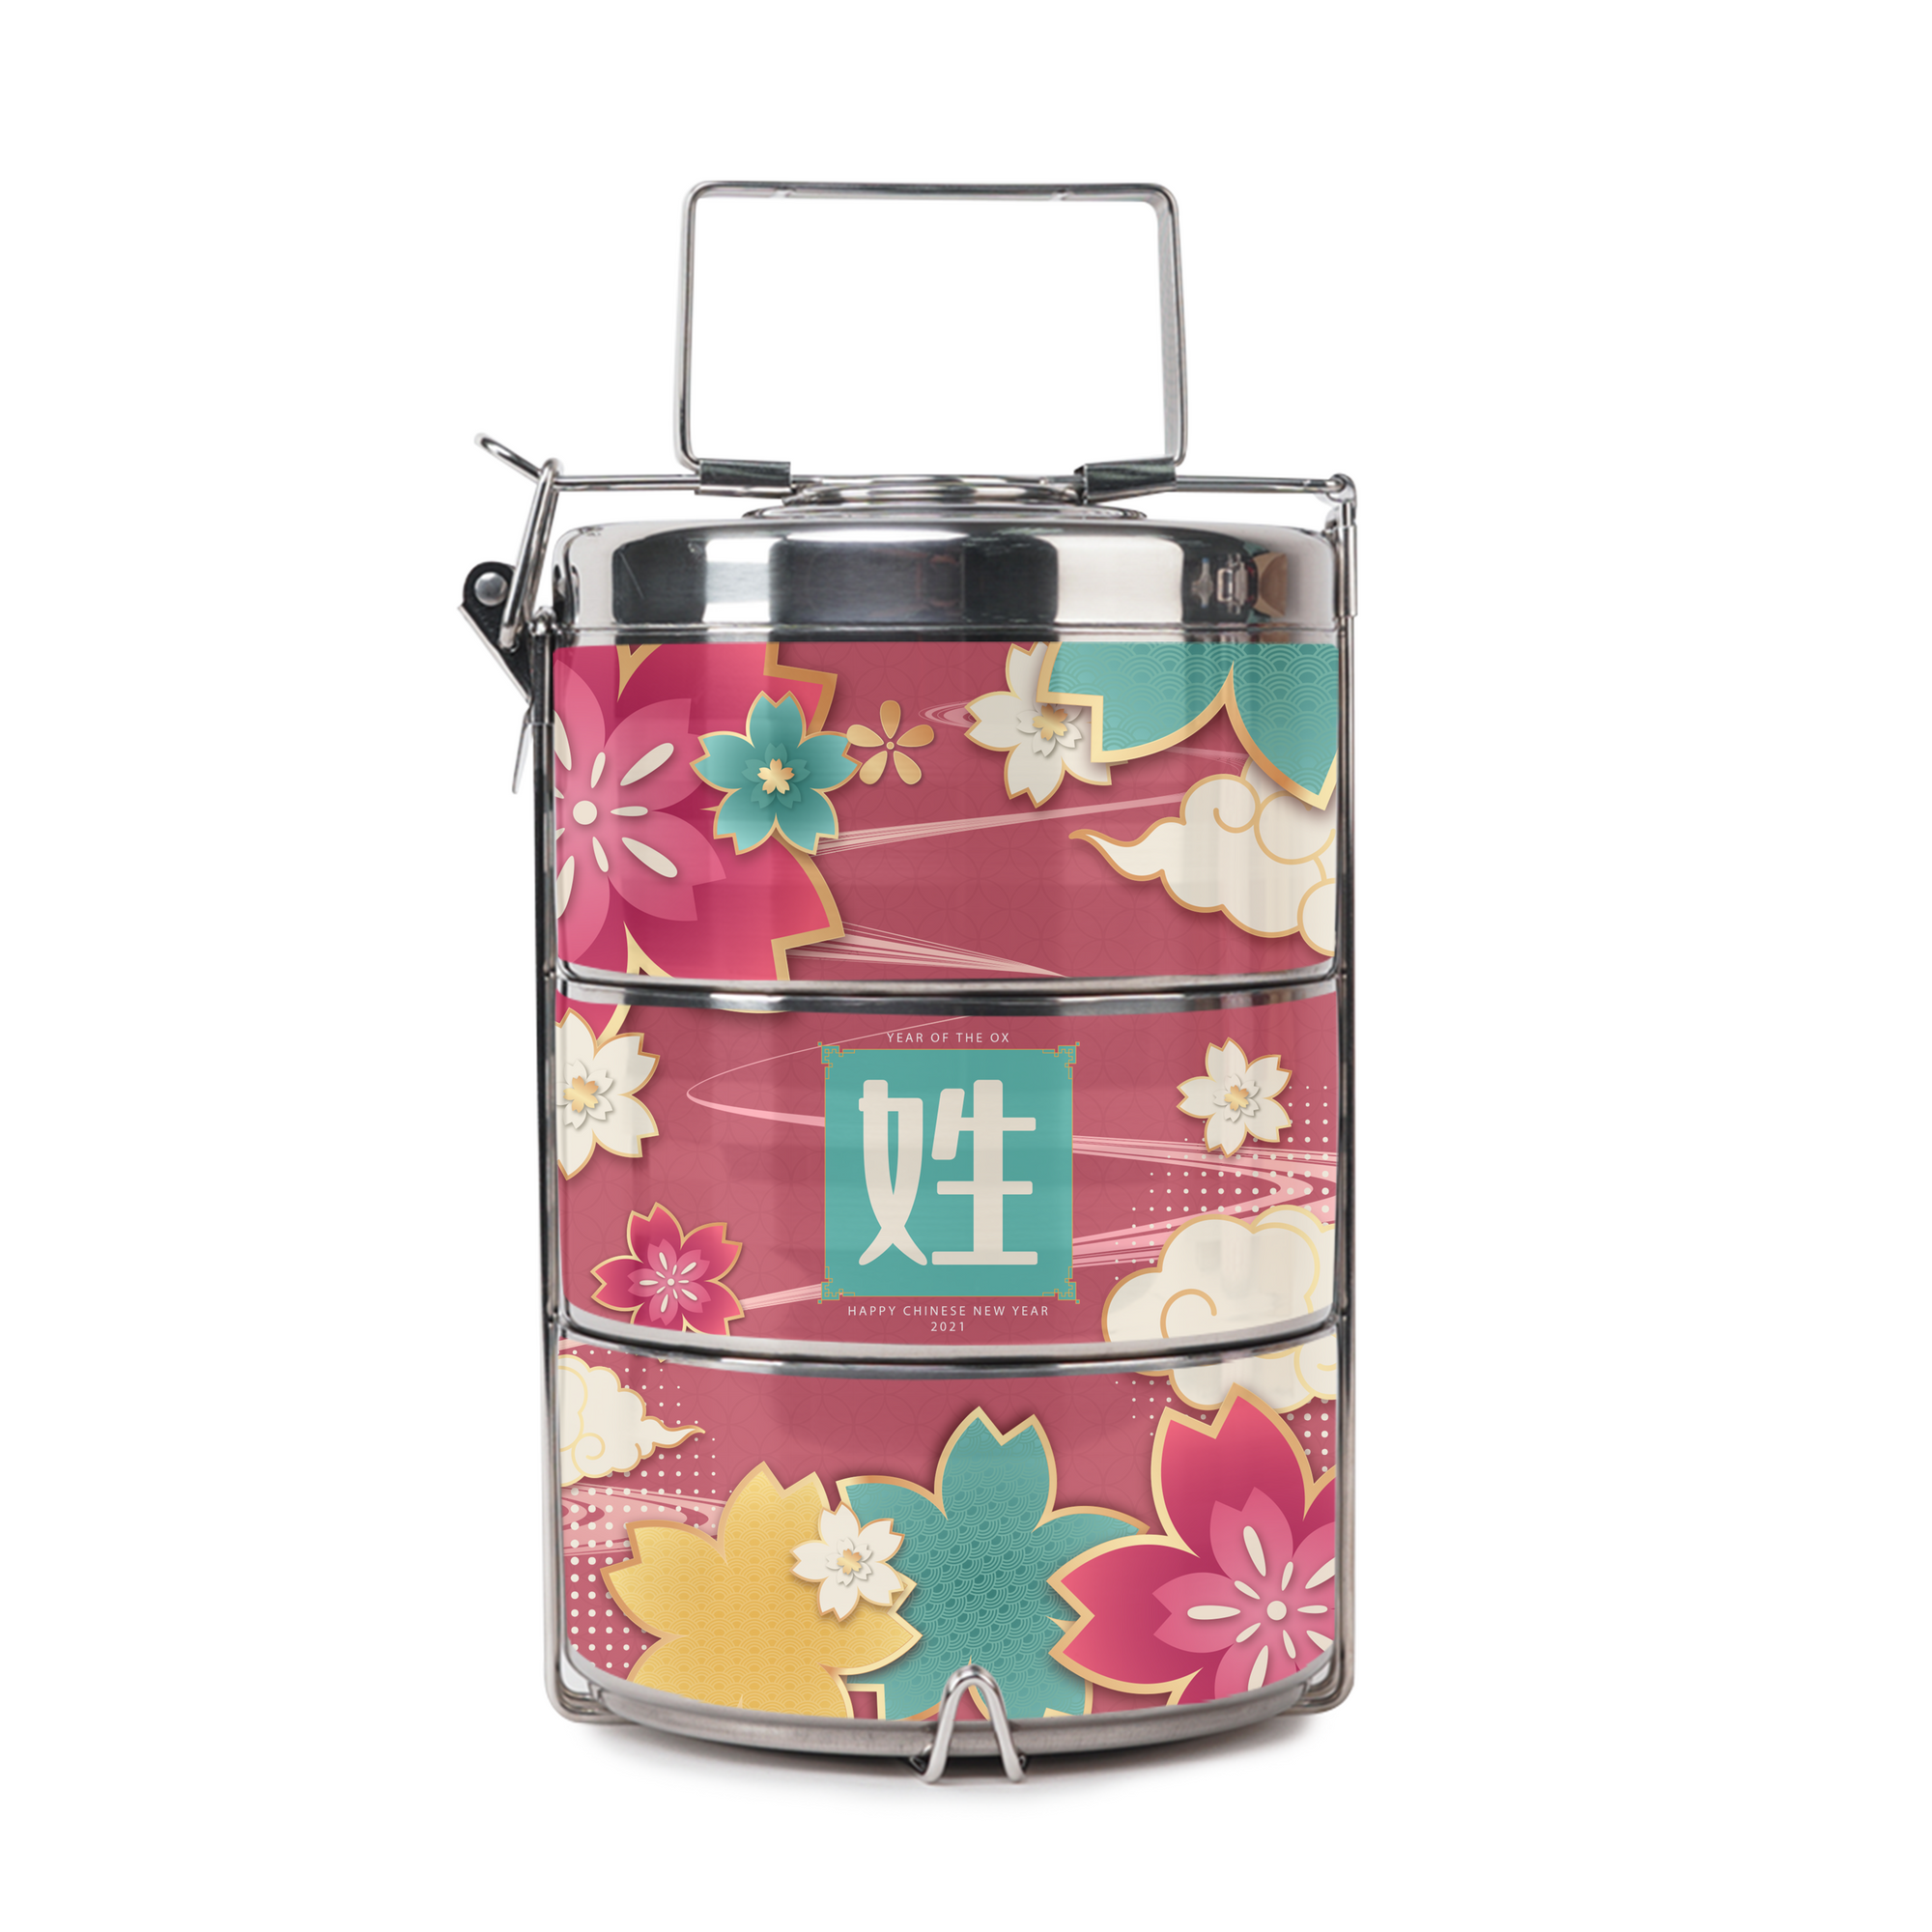 [CNY 2021] CNY Surname Series Cherry Blossom Pink Tiffin Carrier